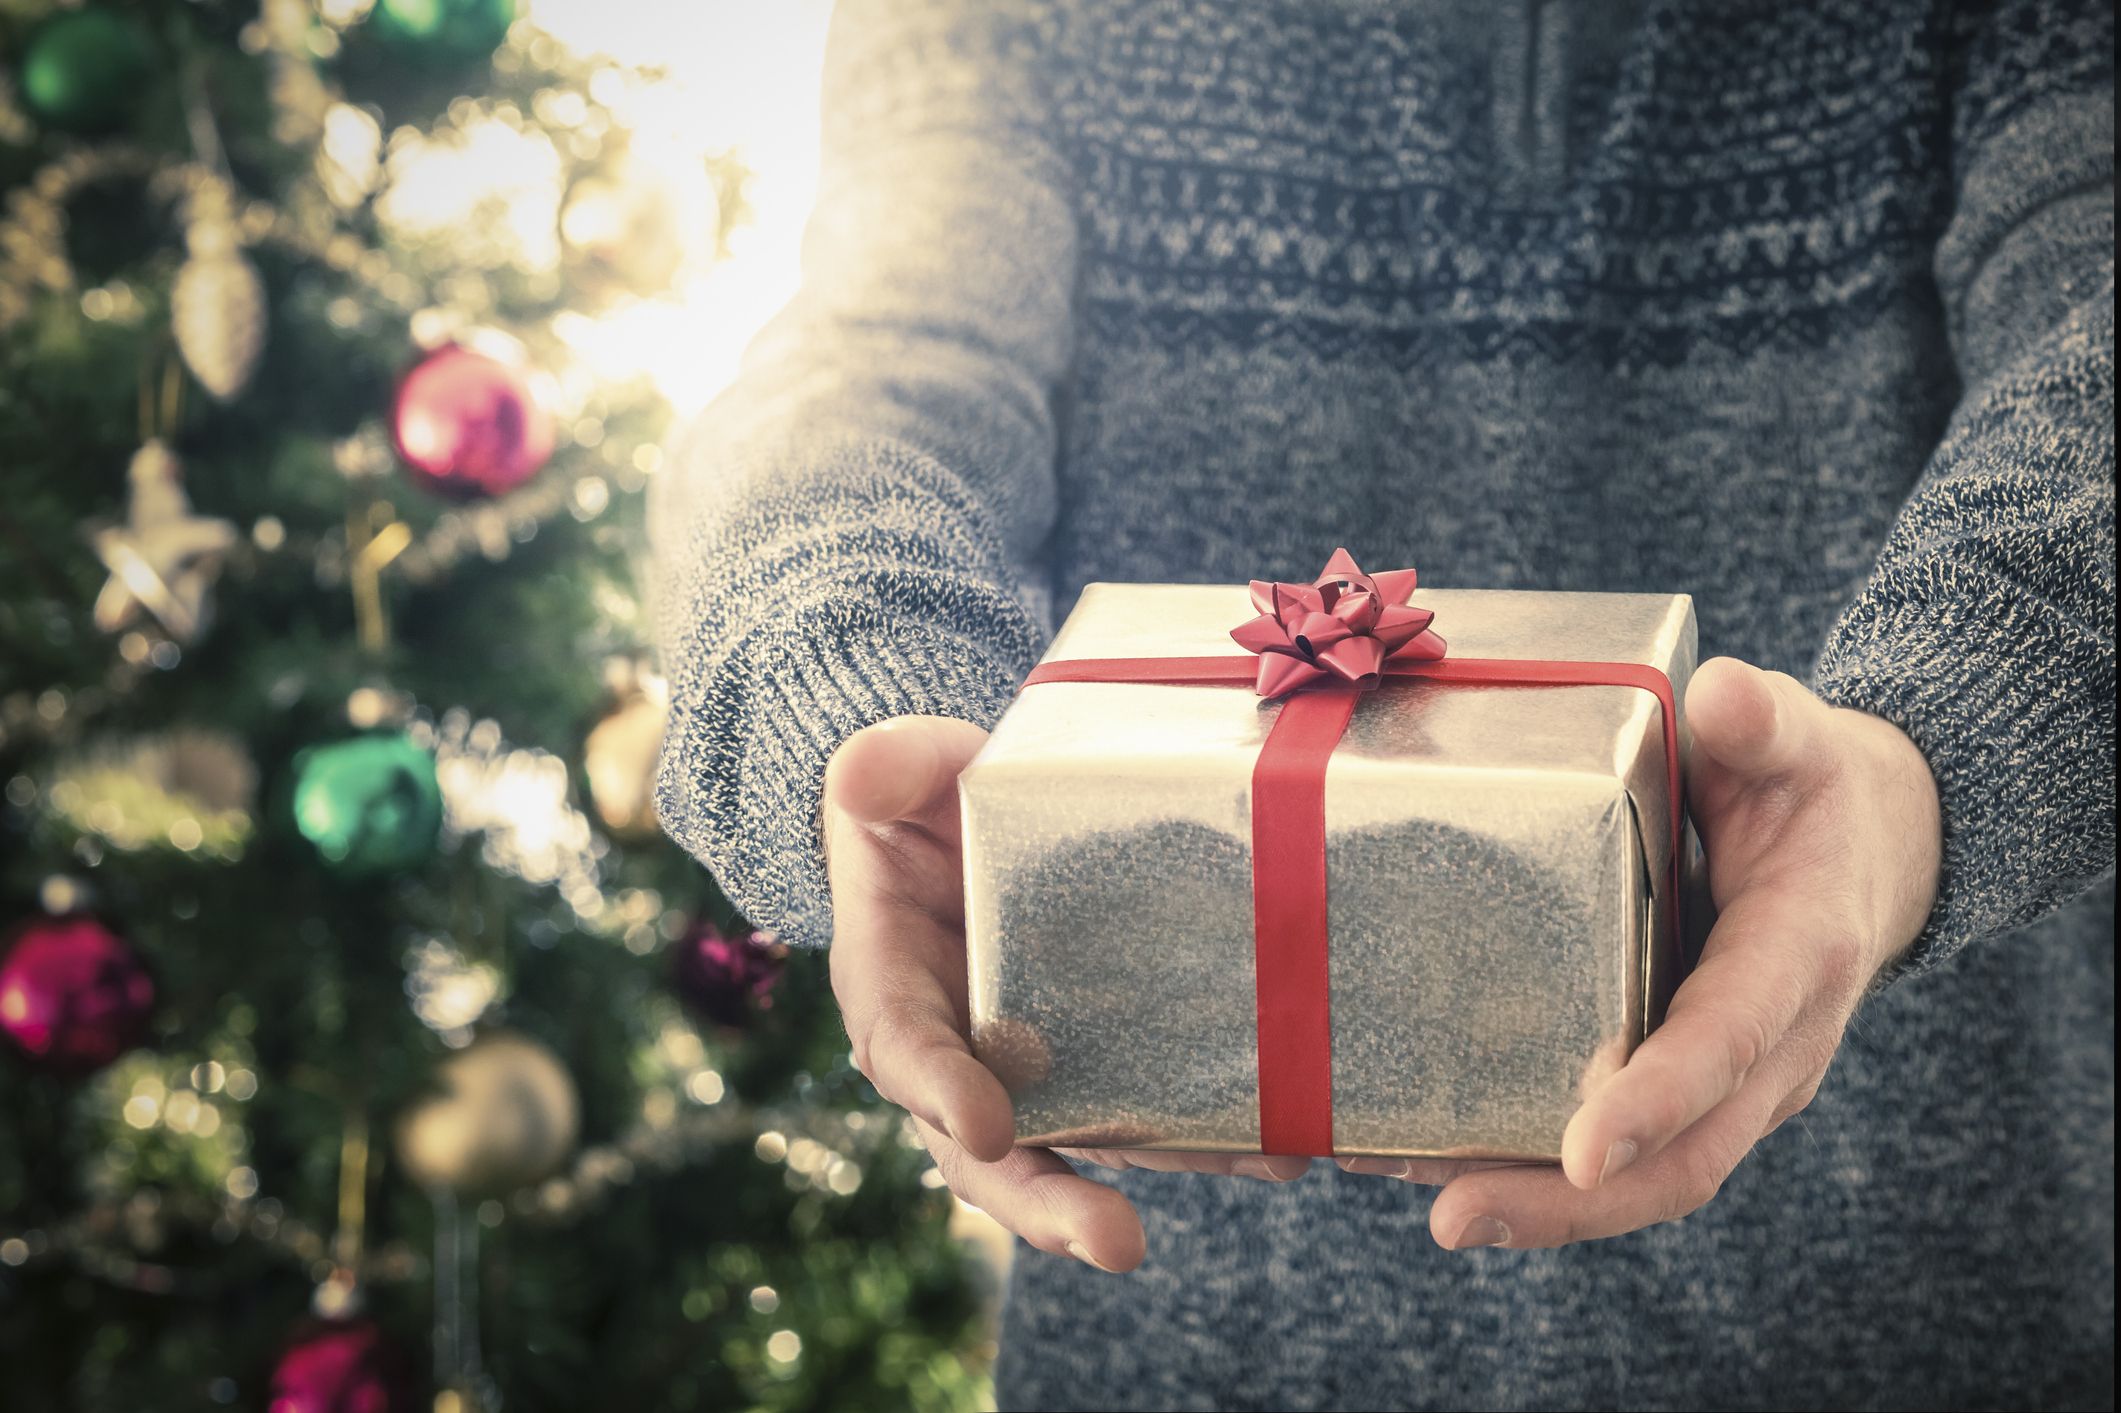 What are virtual gifts and how do you use them? - The Brain Tumour Charity